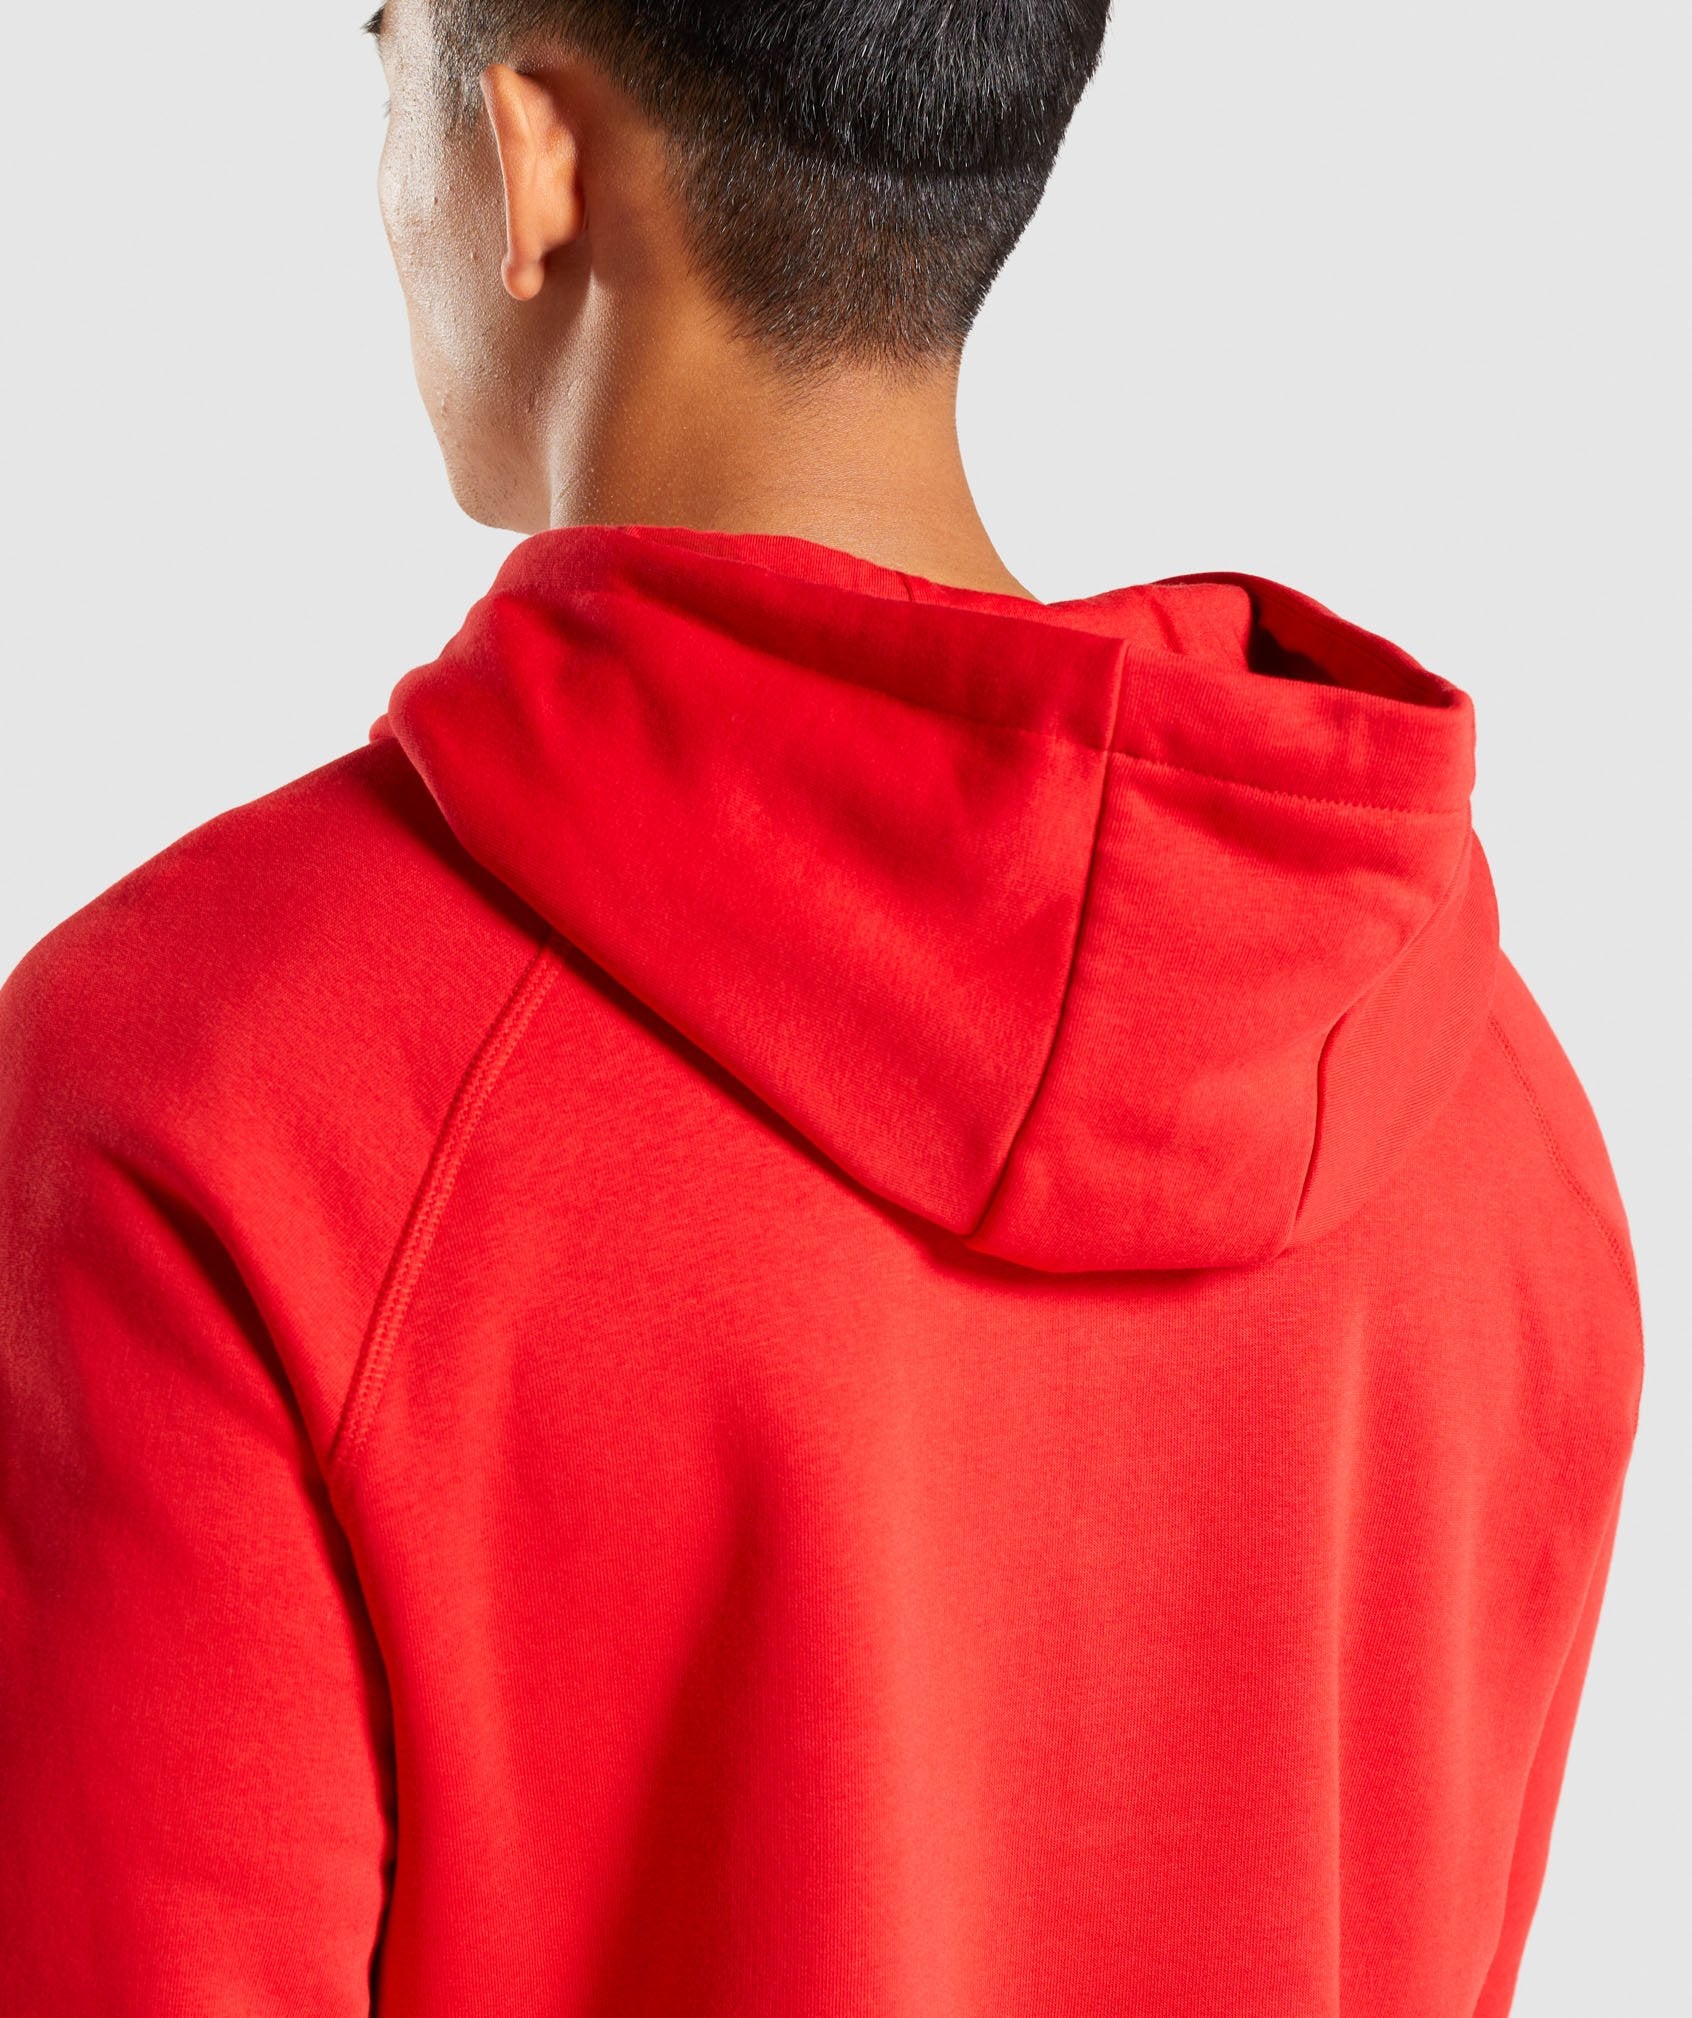 Infill Hoodie in Red